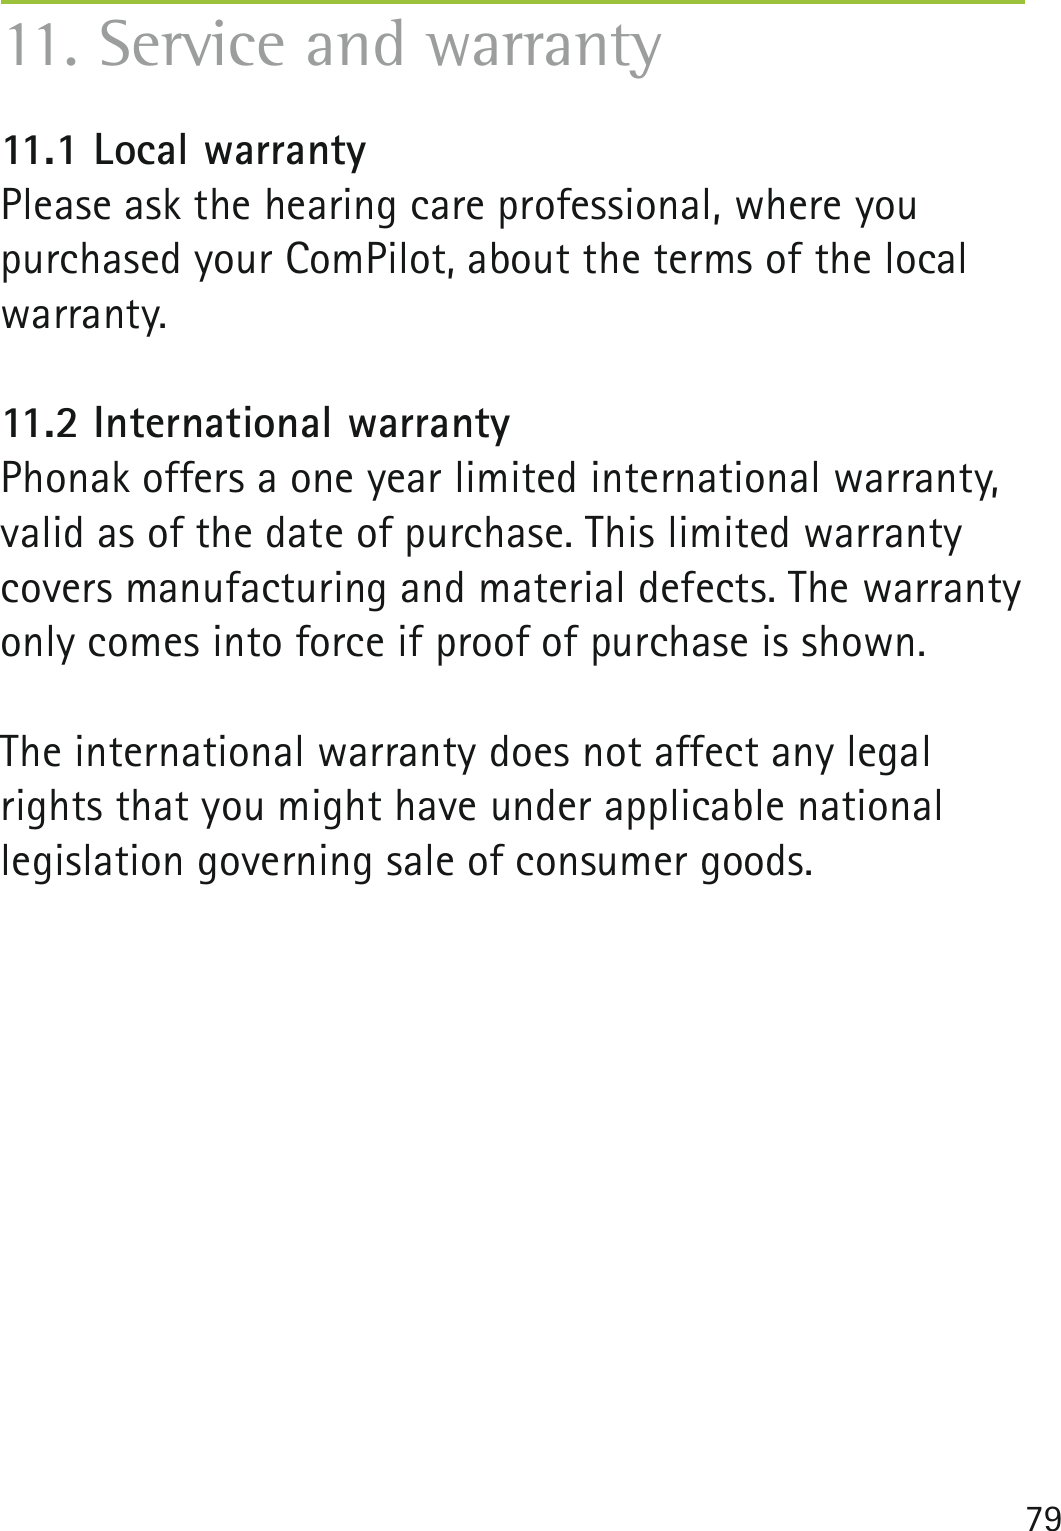 7911. Service and warranty11.1 Local warrantyPlease ask the hearing care professional, where you purchased your ComPilot, about the terms of the local warranty.11.2 International warrantyPhonak offers a one year limited international warranty, valid as of the date of purchase. This limited warranty covers manufacturing and material defects. The warranty only comes into force if proof of purchase is shown. The international warranty does not affect any legalrights that you might have under applicable nationallegislation governing sale of consumer goods.